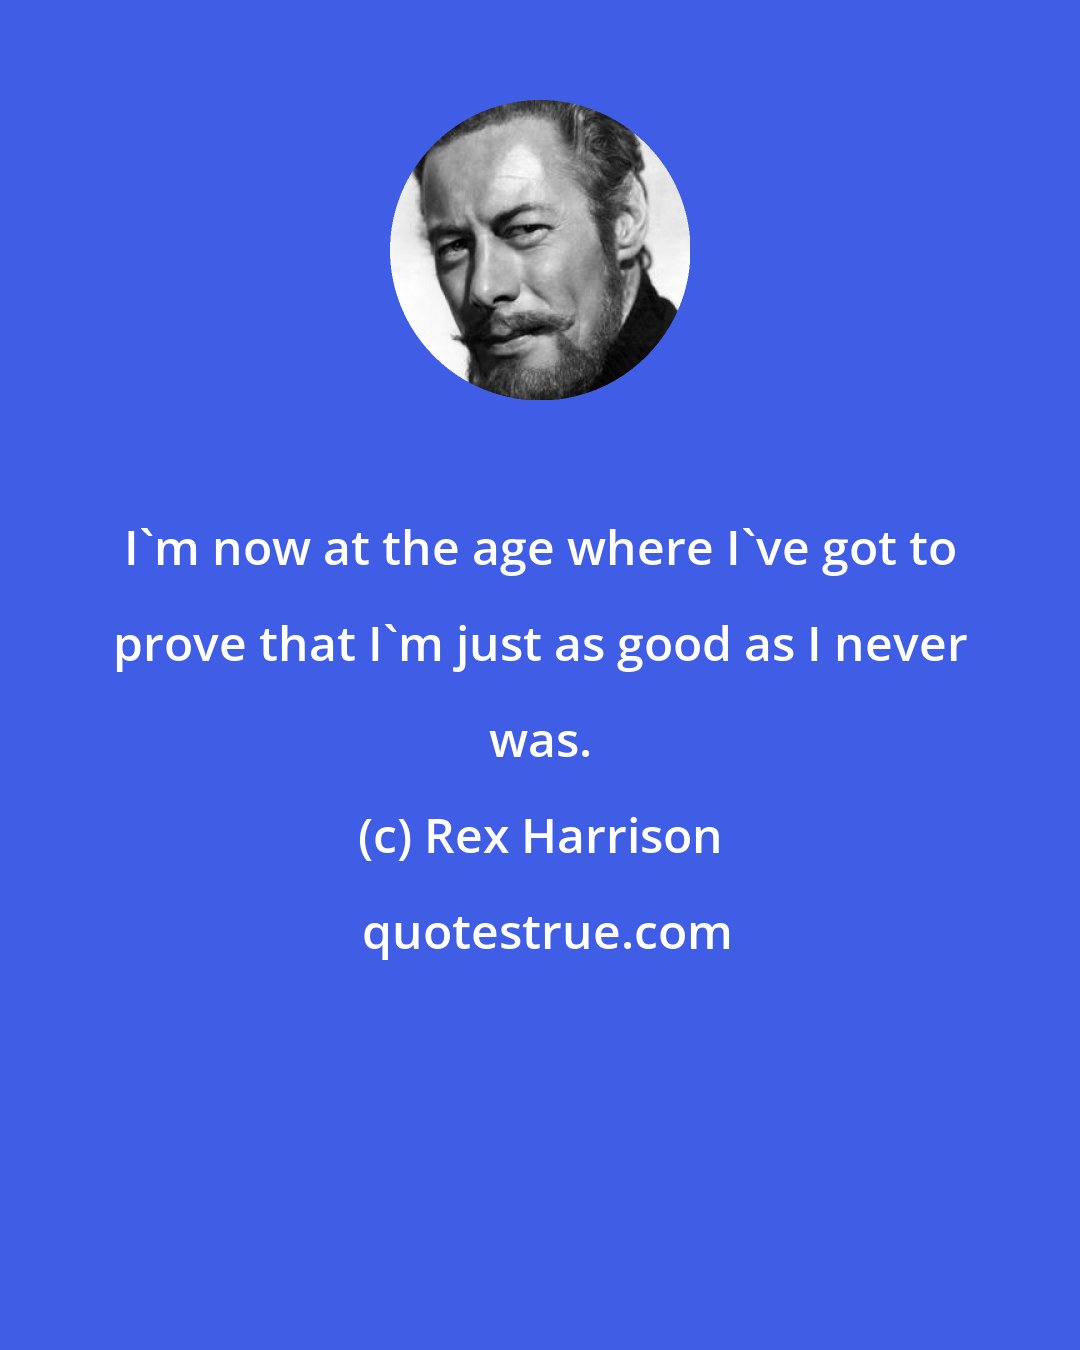 Rex Harrison: I'm now at the age where I've got to prove that I'm just as good as I never was.